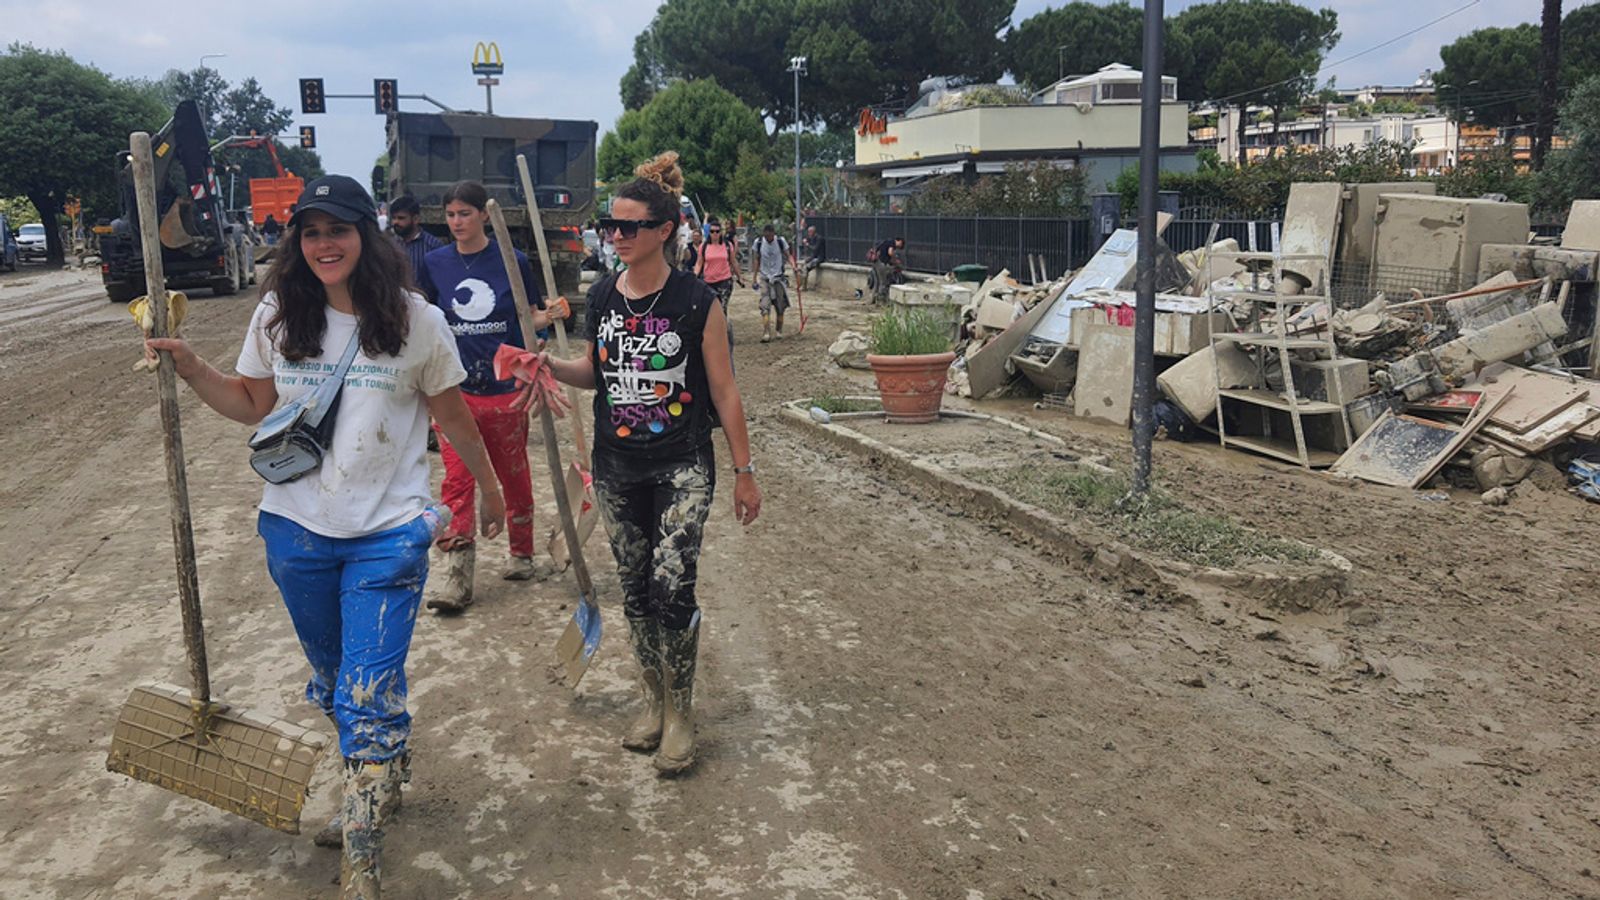 Italian PM Giorgia Meloni visits floods after 36,000 forced from their homes